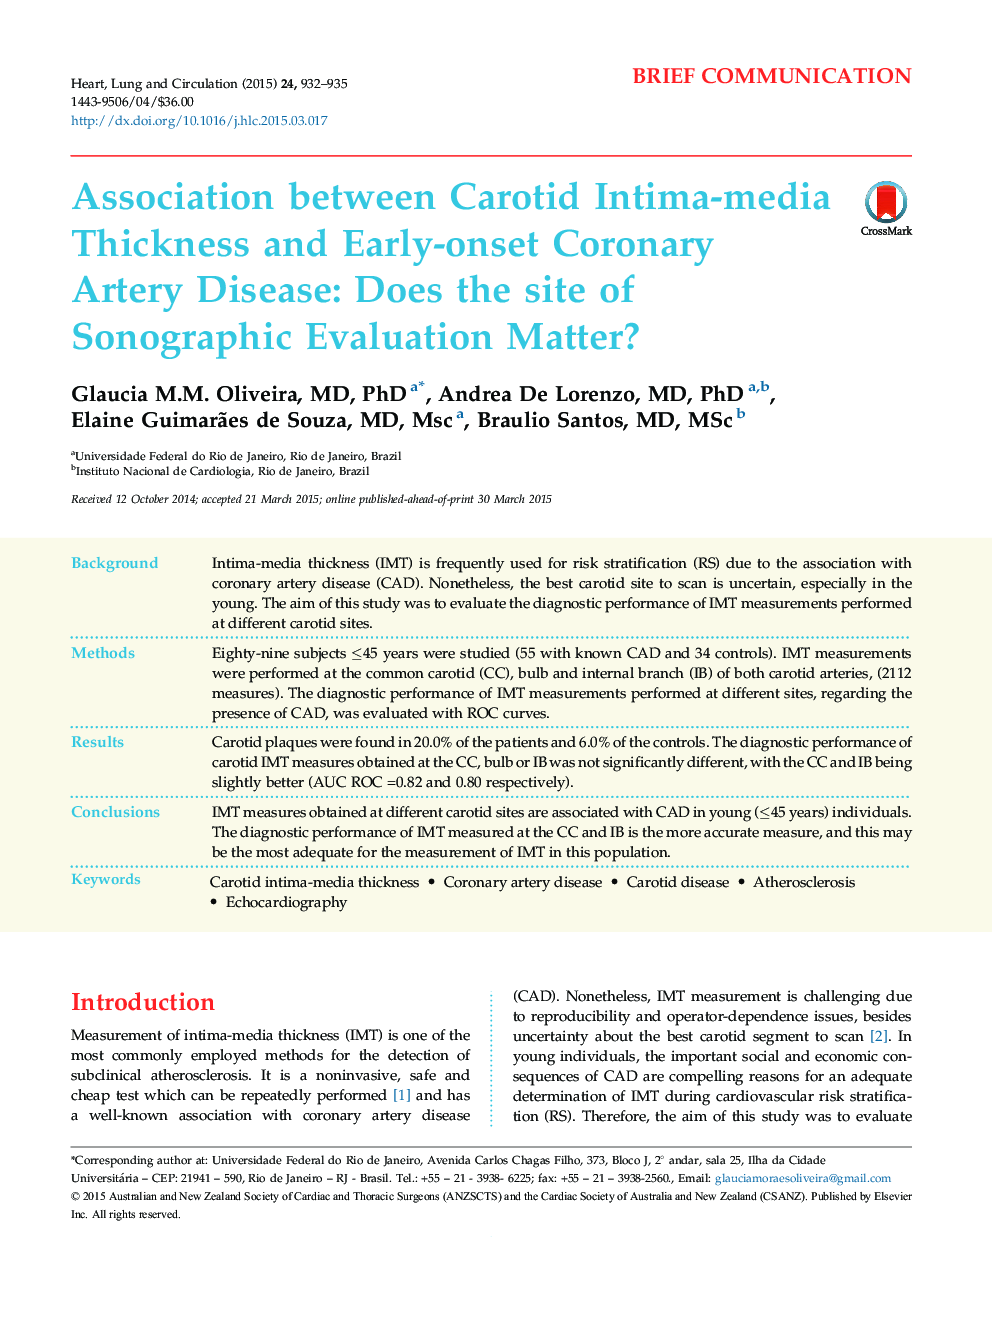 Association between Carotid Intima-media Thickness and Early-onset Coronary Artery Disease: Does the site of Sonographic Evaluation Matter?